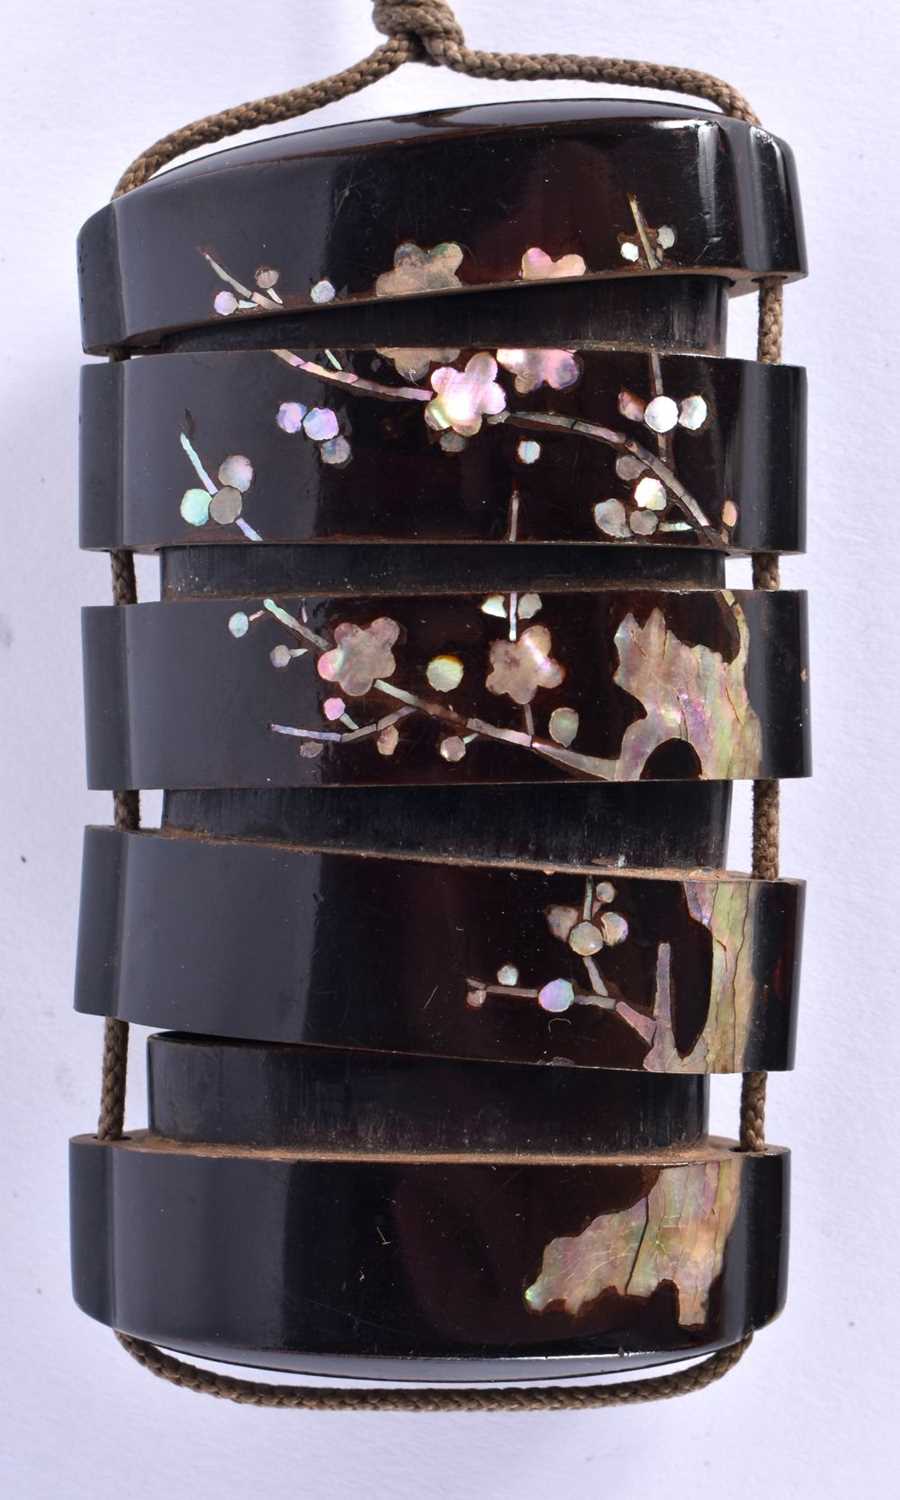 A LATE 19TH CENTURY JAPANESE MEIJI PERIOD MOTHER OF PEARL INLAID BLACK LACQUER INRO decorated with - Image 4 of 4